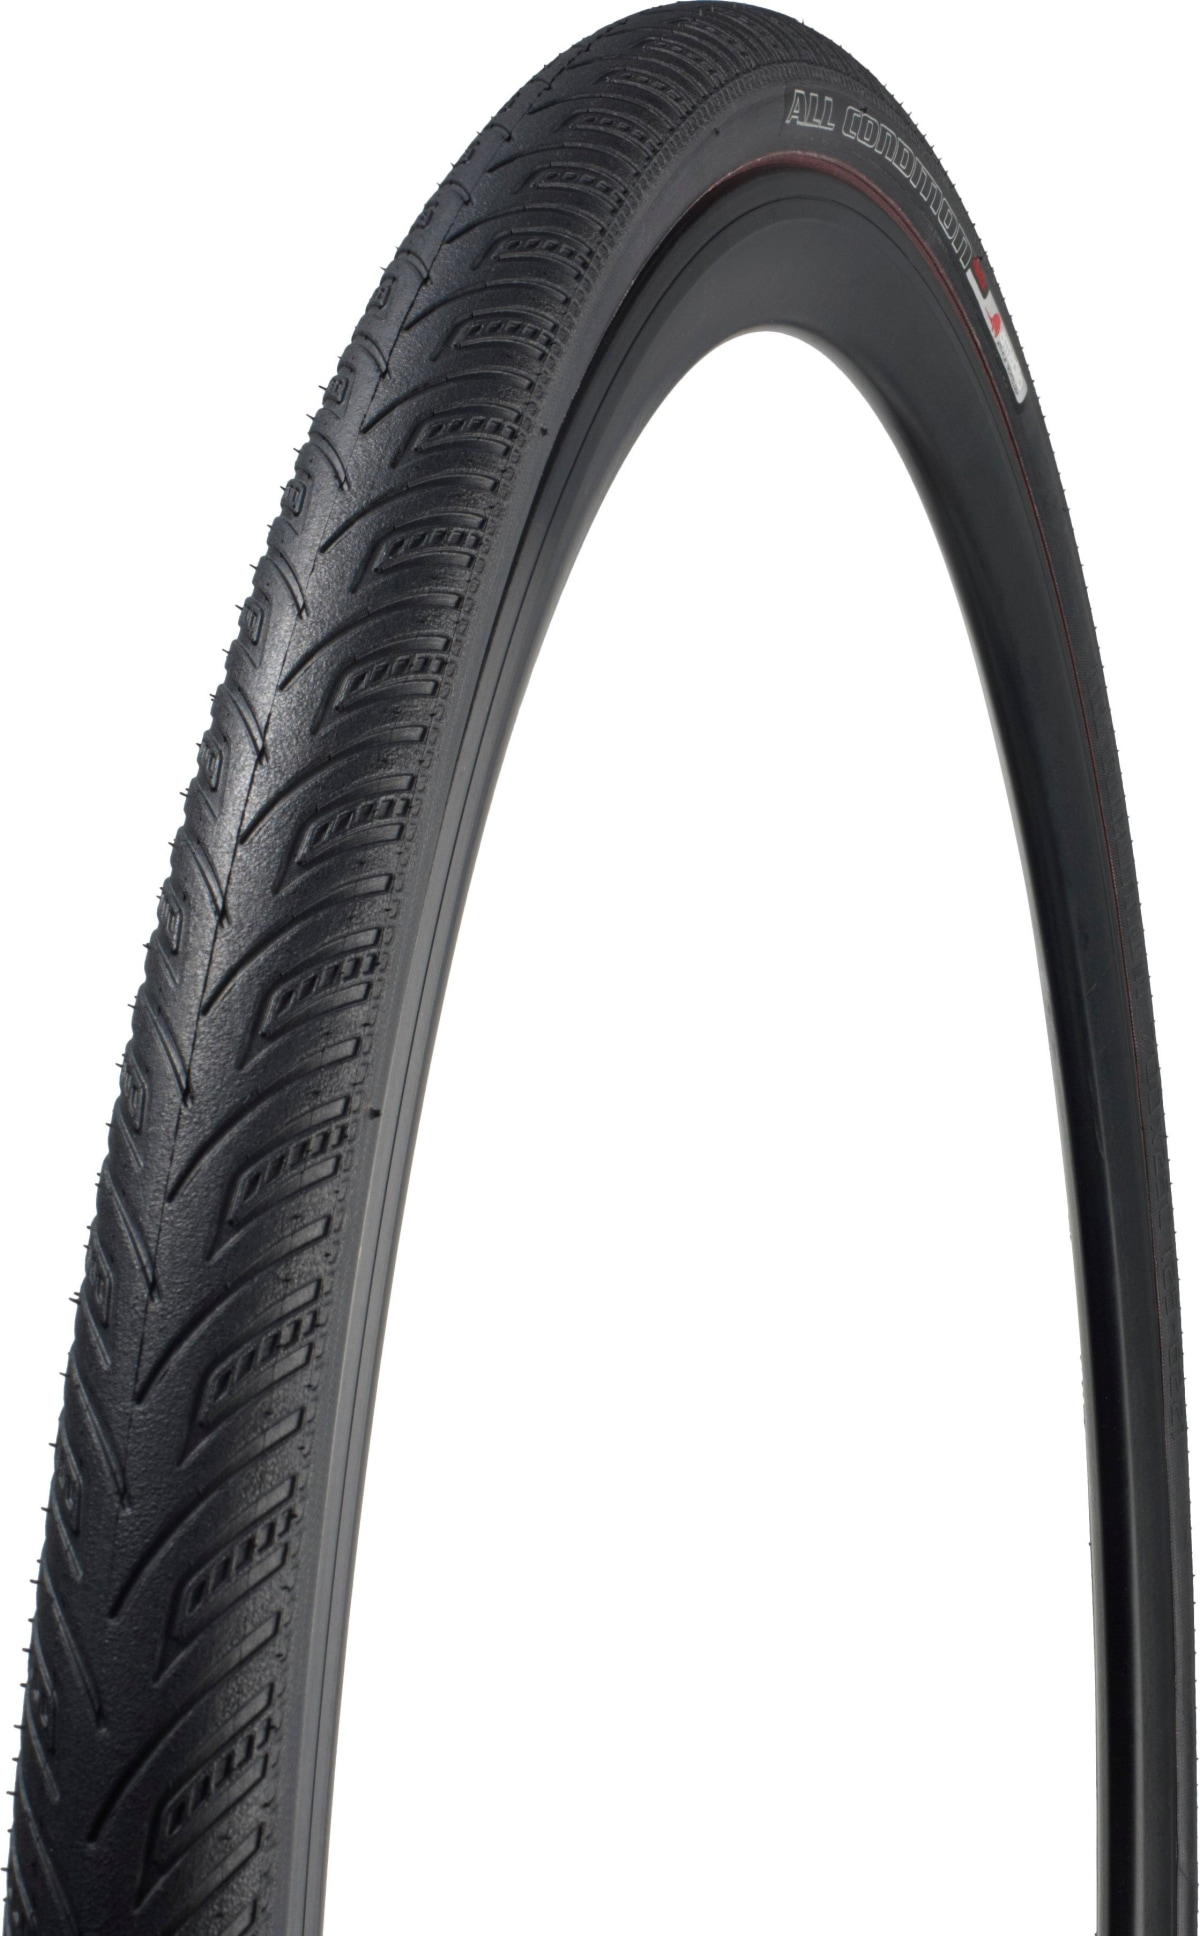 Specialized  All Condition Armadillo Road Tyres 700 X 28 Black